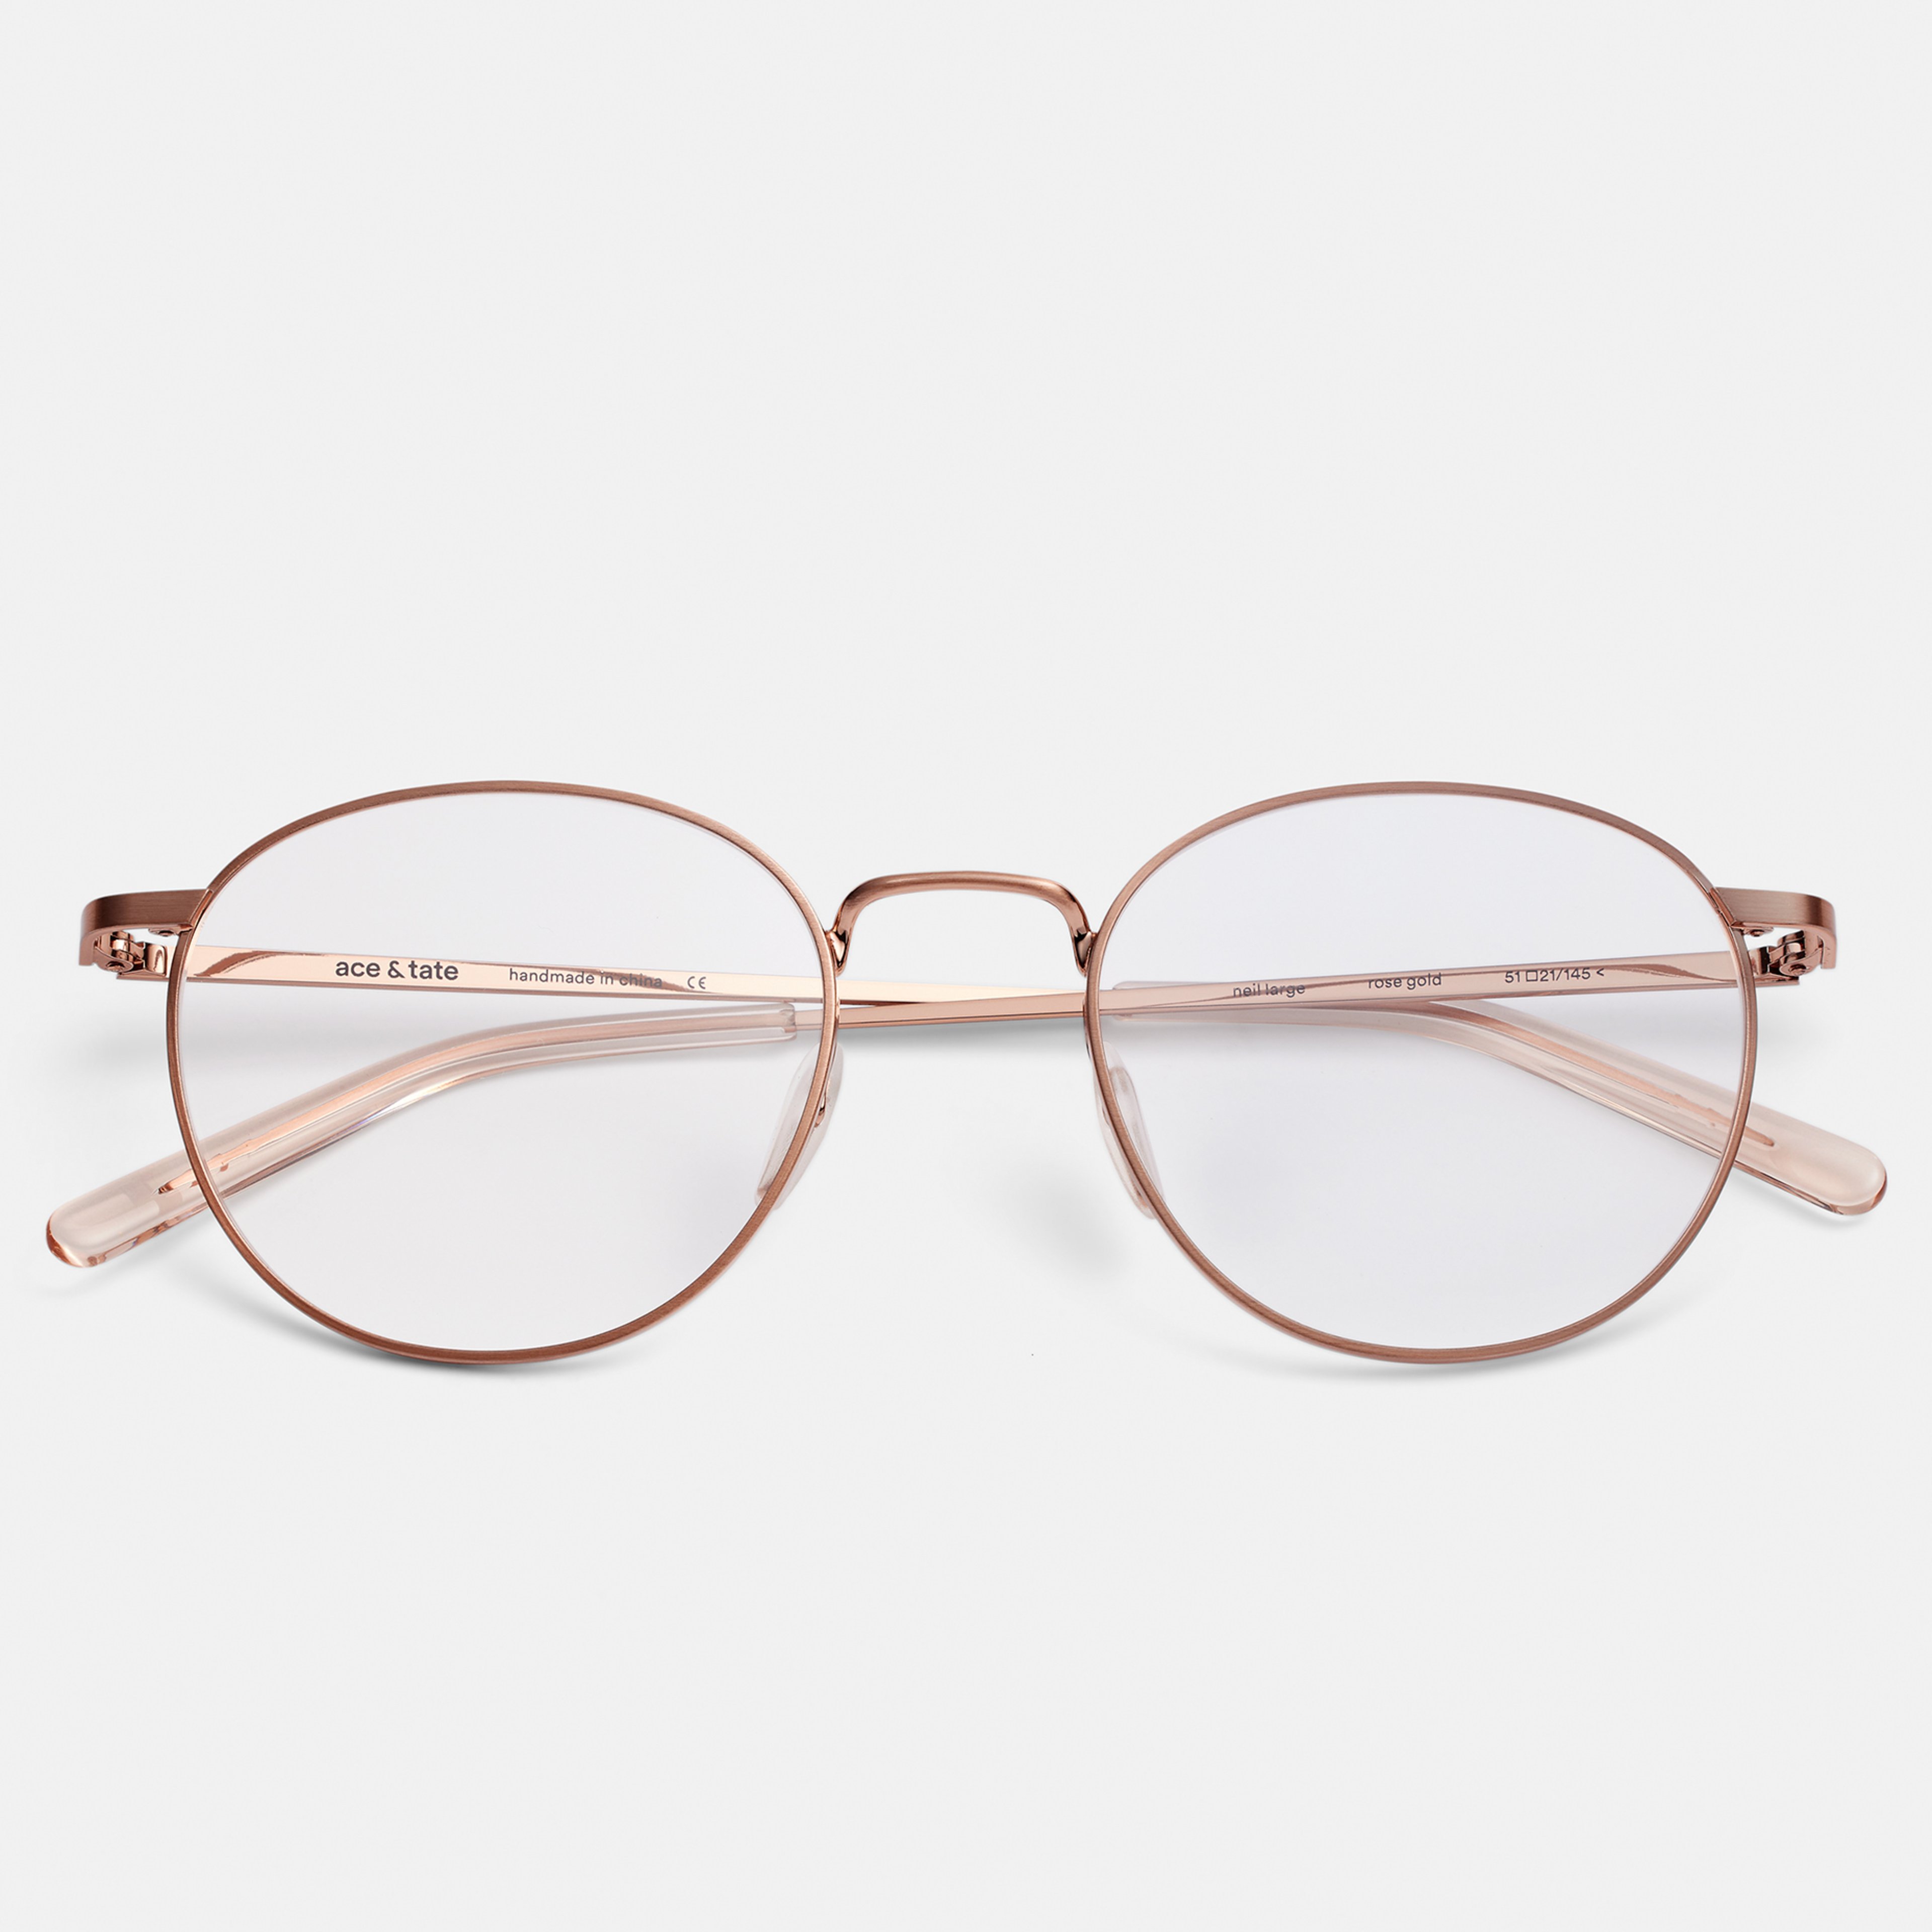 Ace & Tate Optiques | ronde métal in Or, Rose